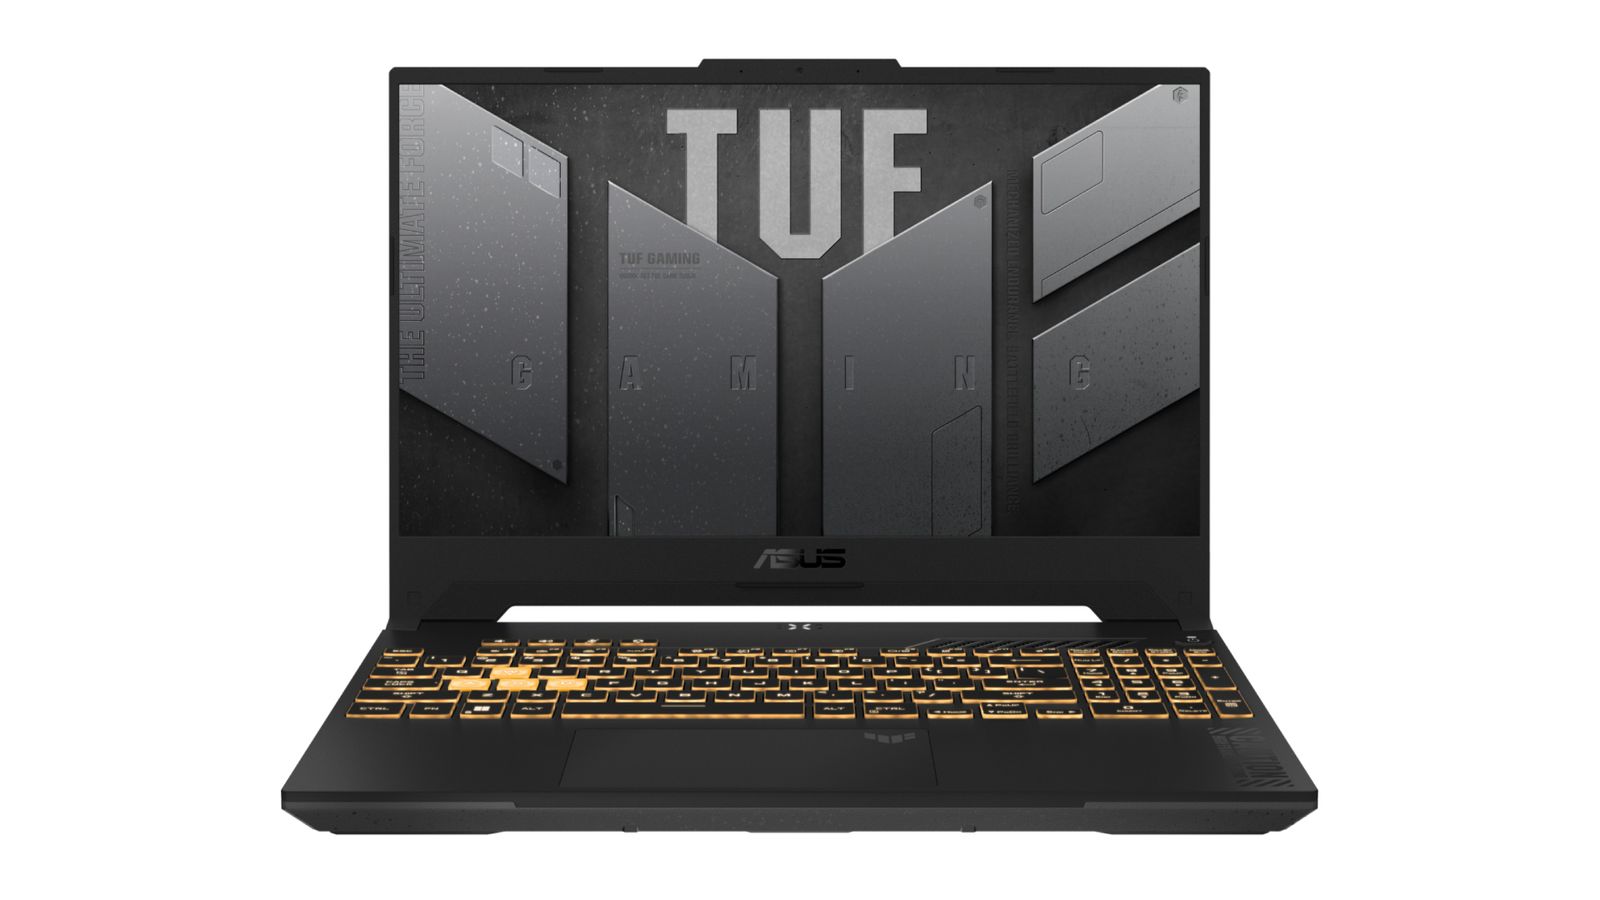 Best Dead Island 2 gaming laptop - ASUS TUF Gaming F15 product image of a black laptop featuring yellow backlit keys.